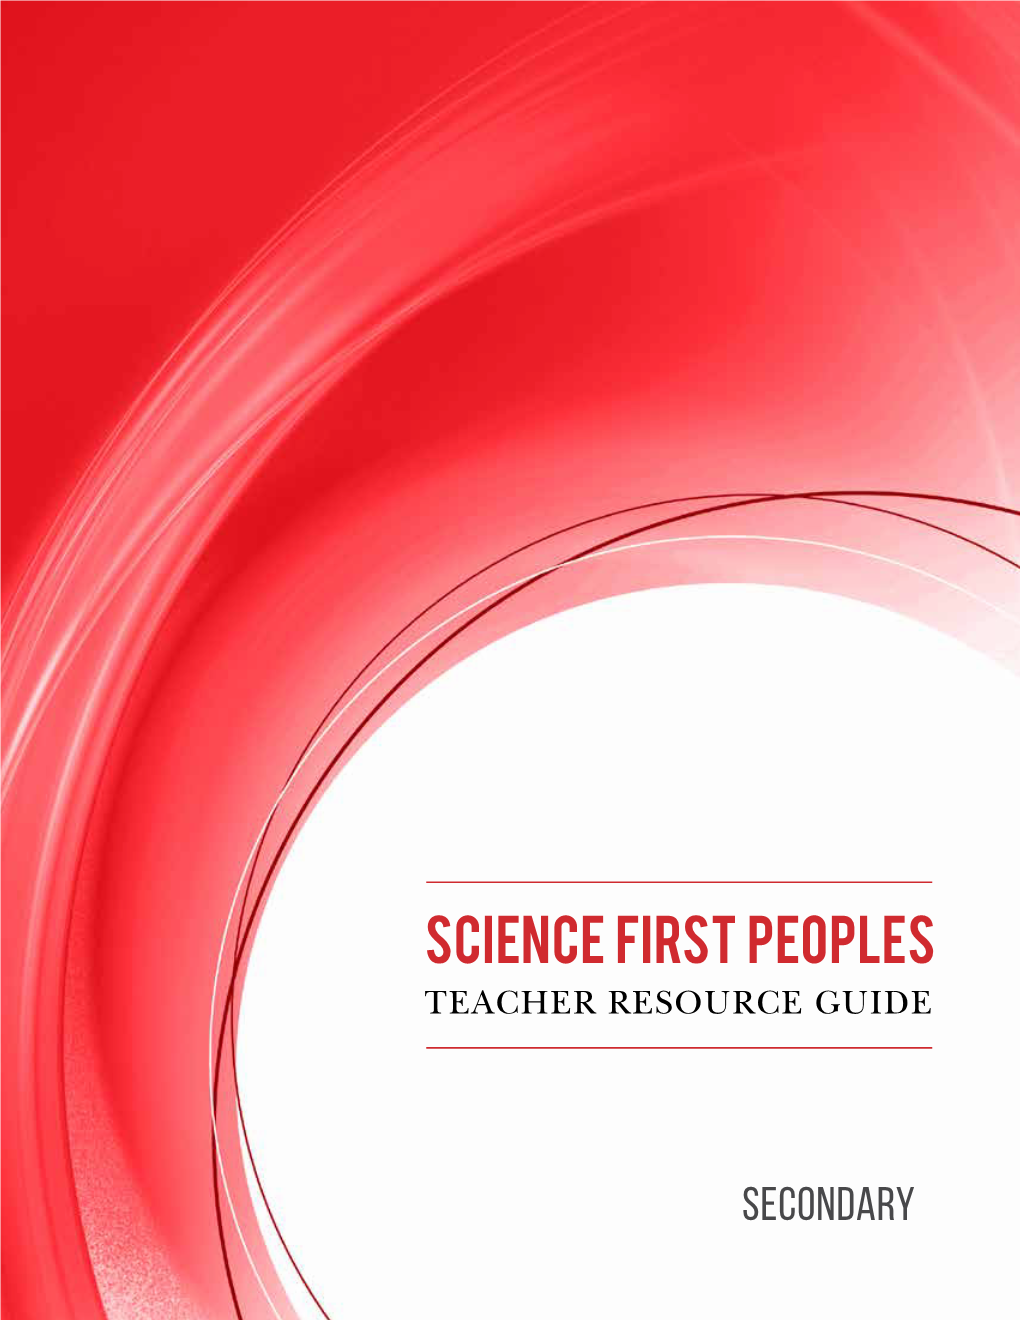 FNESC/FNSA Secondary Science First Peoples Teacher Resource